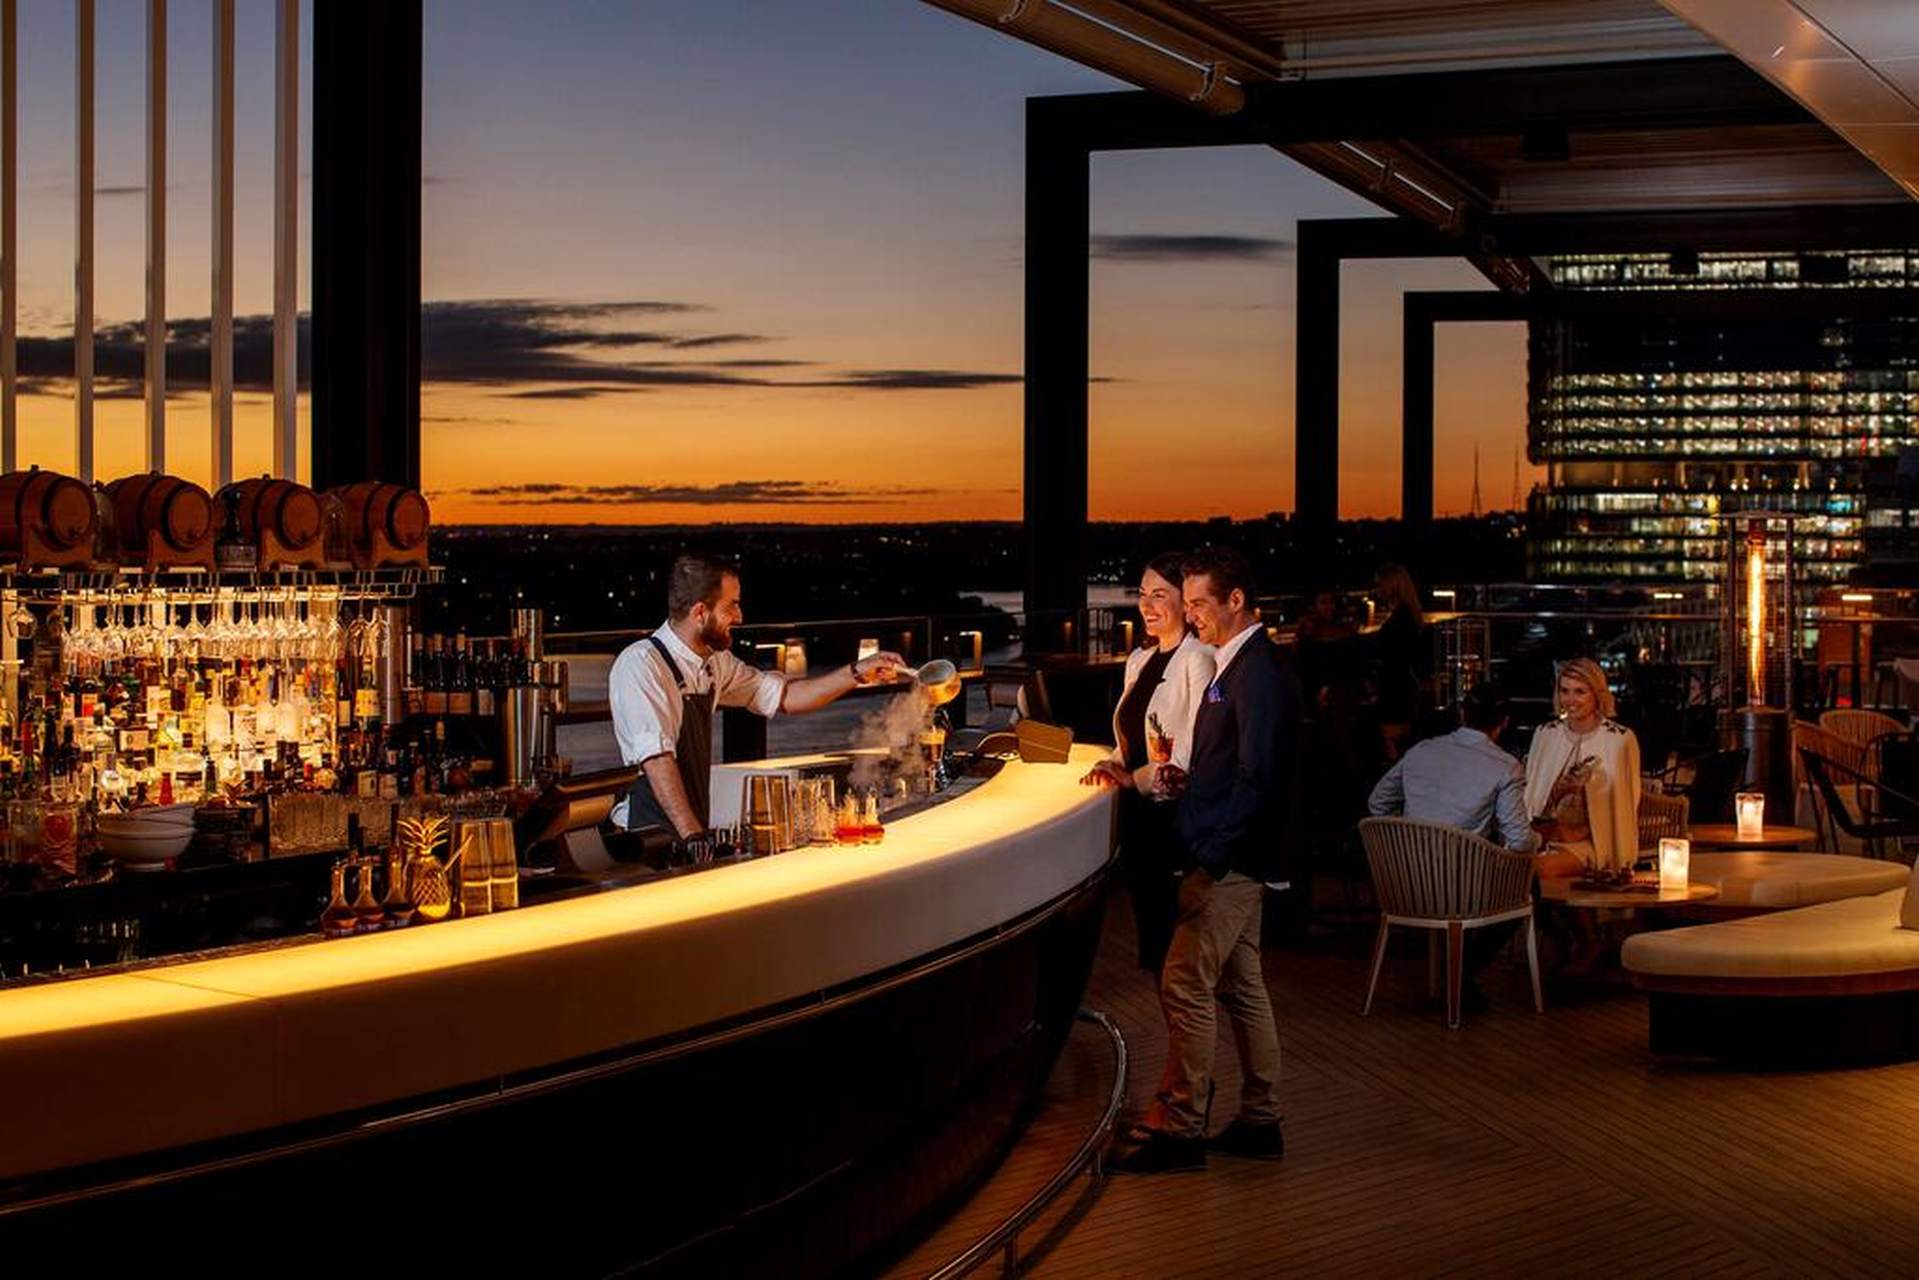 The best Darling Harbour bars serving cocktails and sea views | Darling